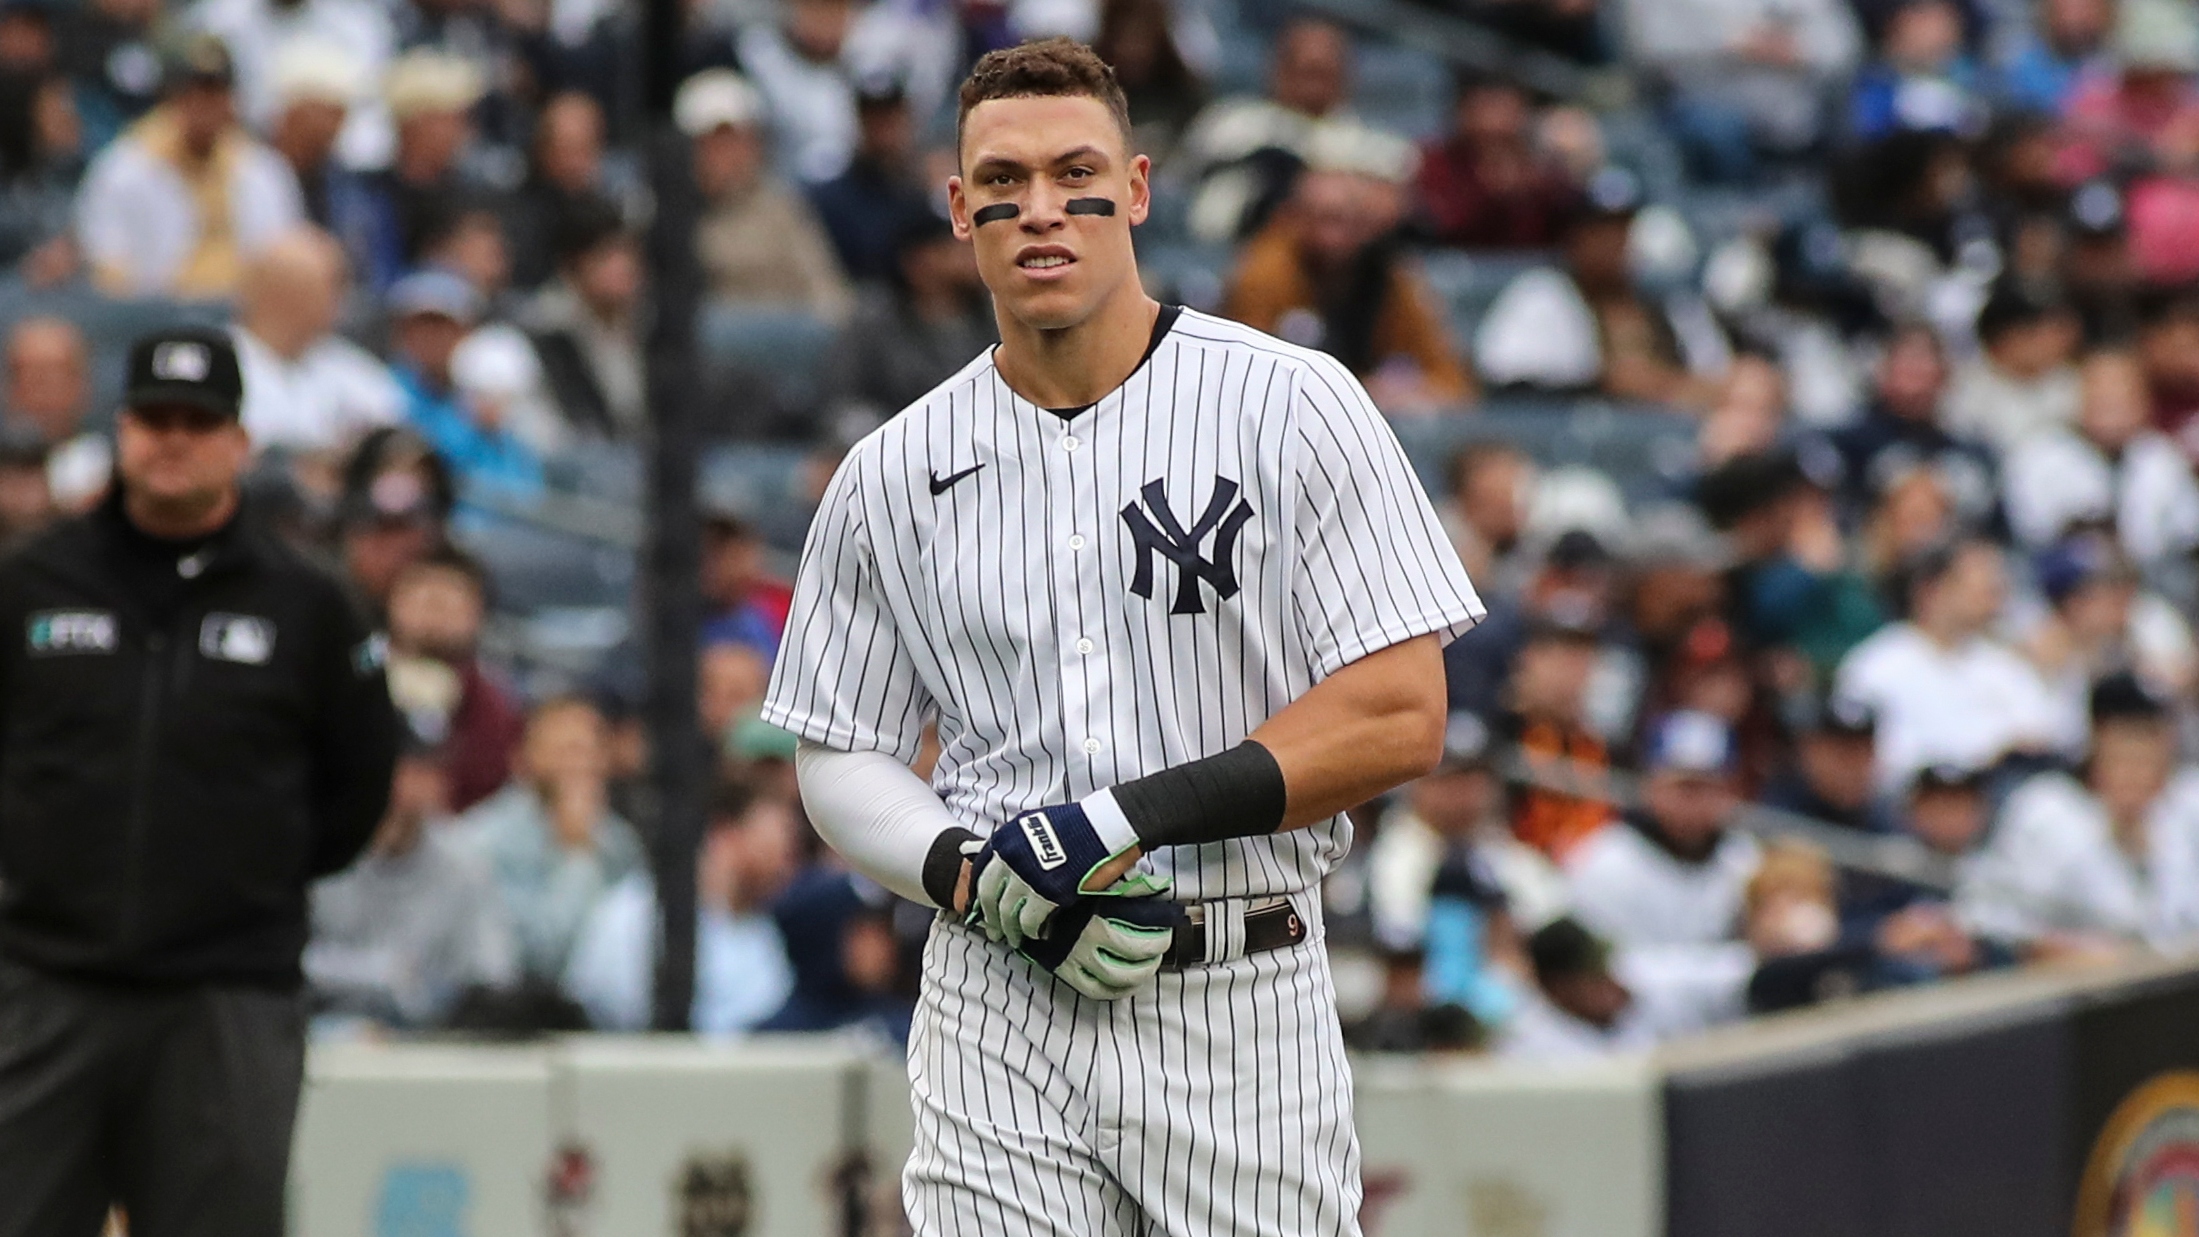 Roger Maris Jr. says Yankees' Aaron Judge would be real home run champ with  62